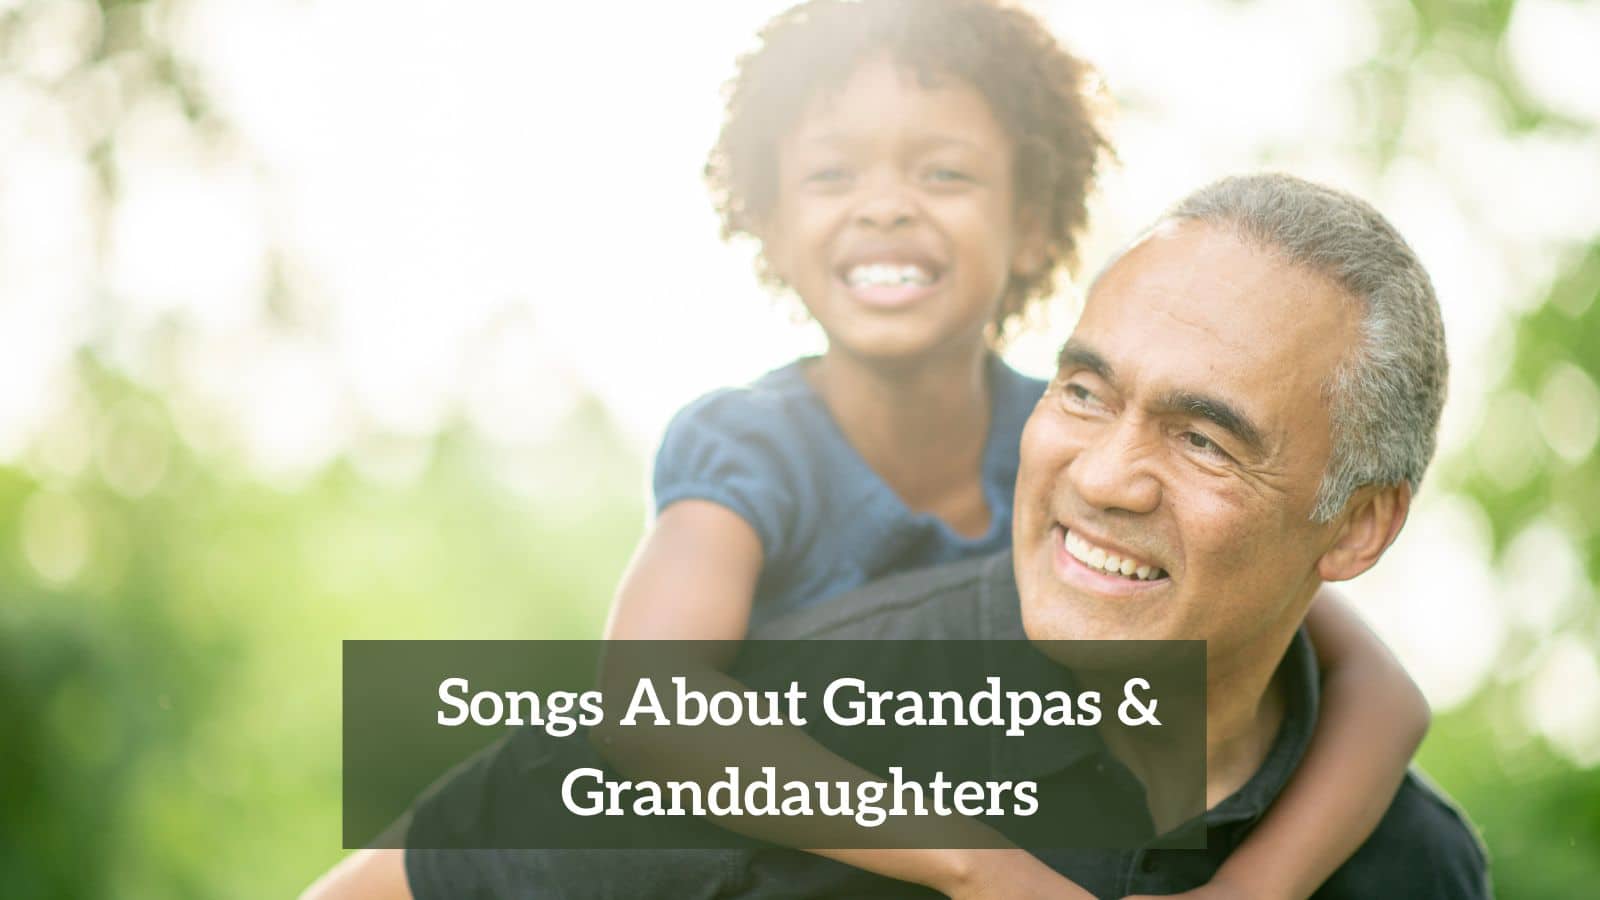 Songs About Grandpas & Granddaughters